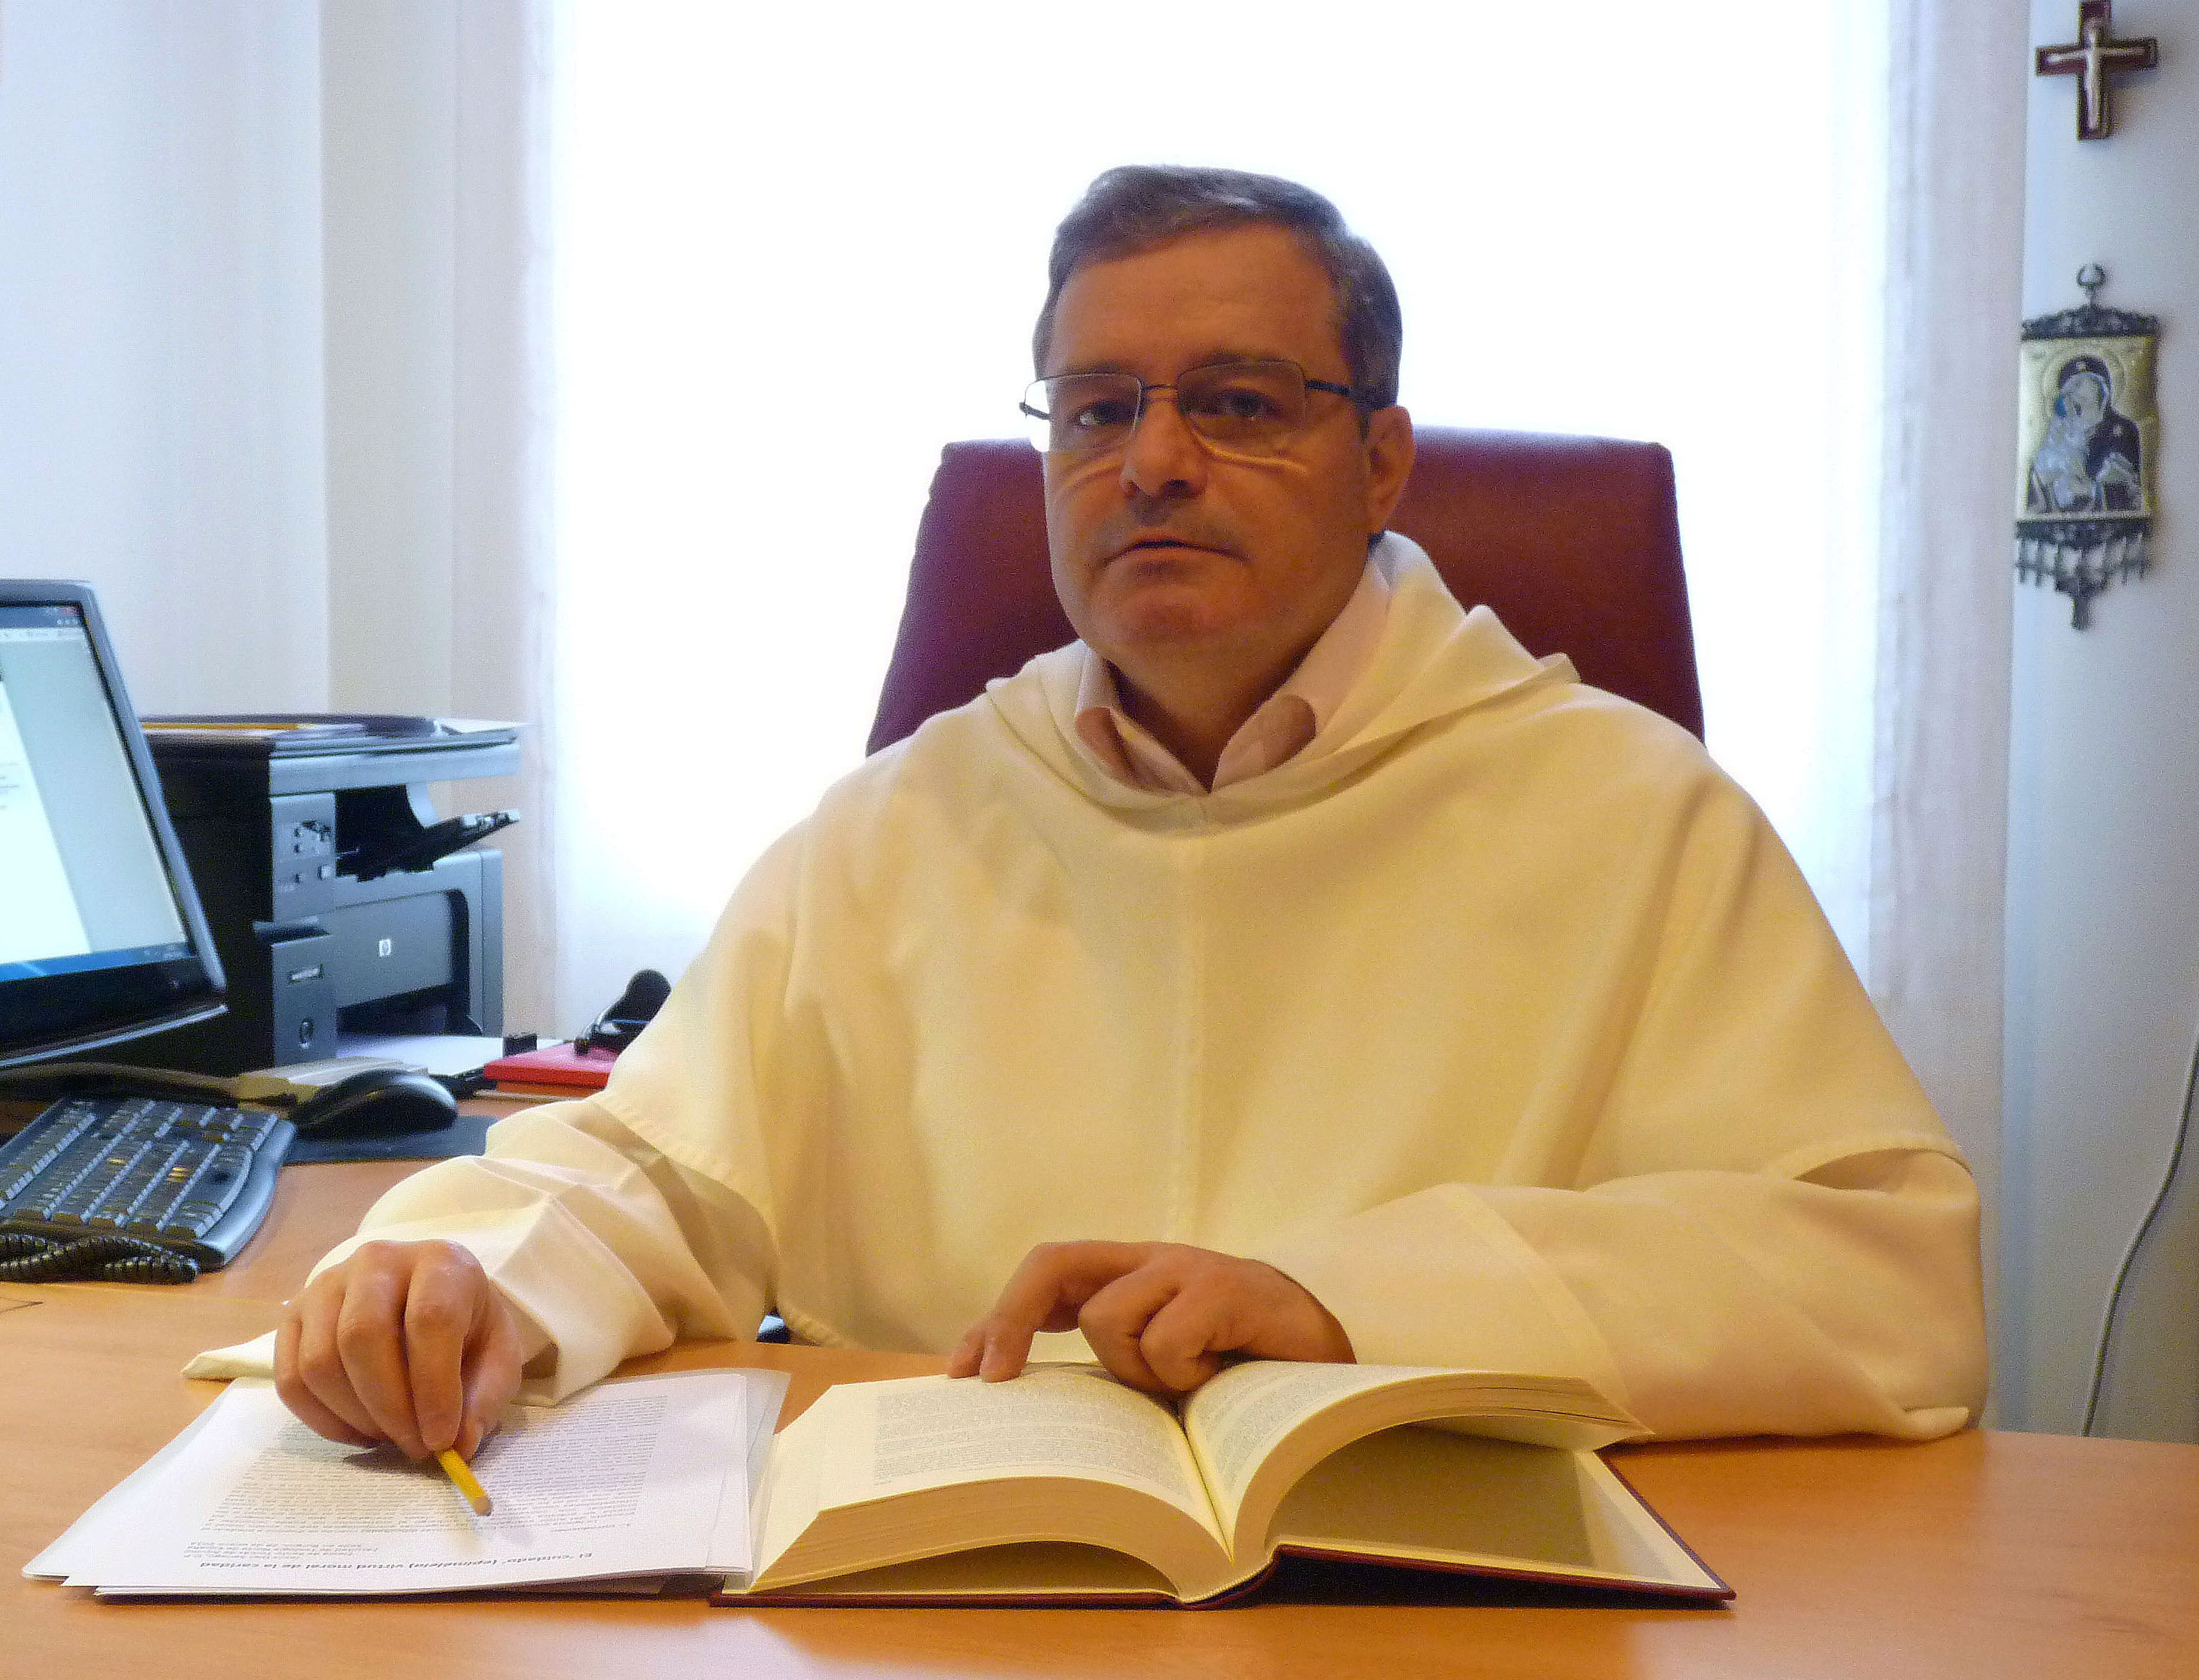 New Superior of the Order of Preachers in Spain